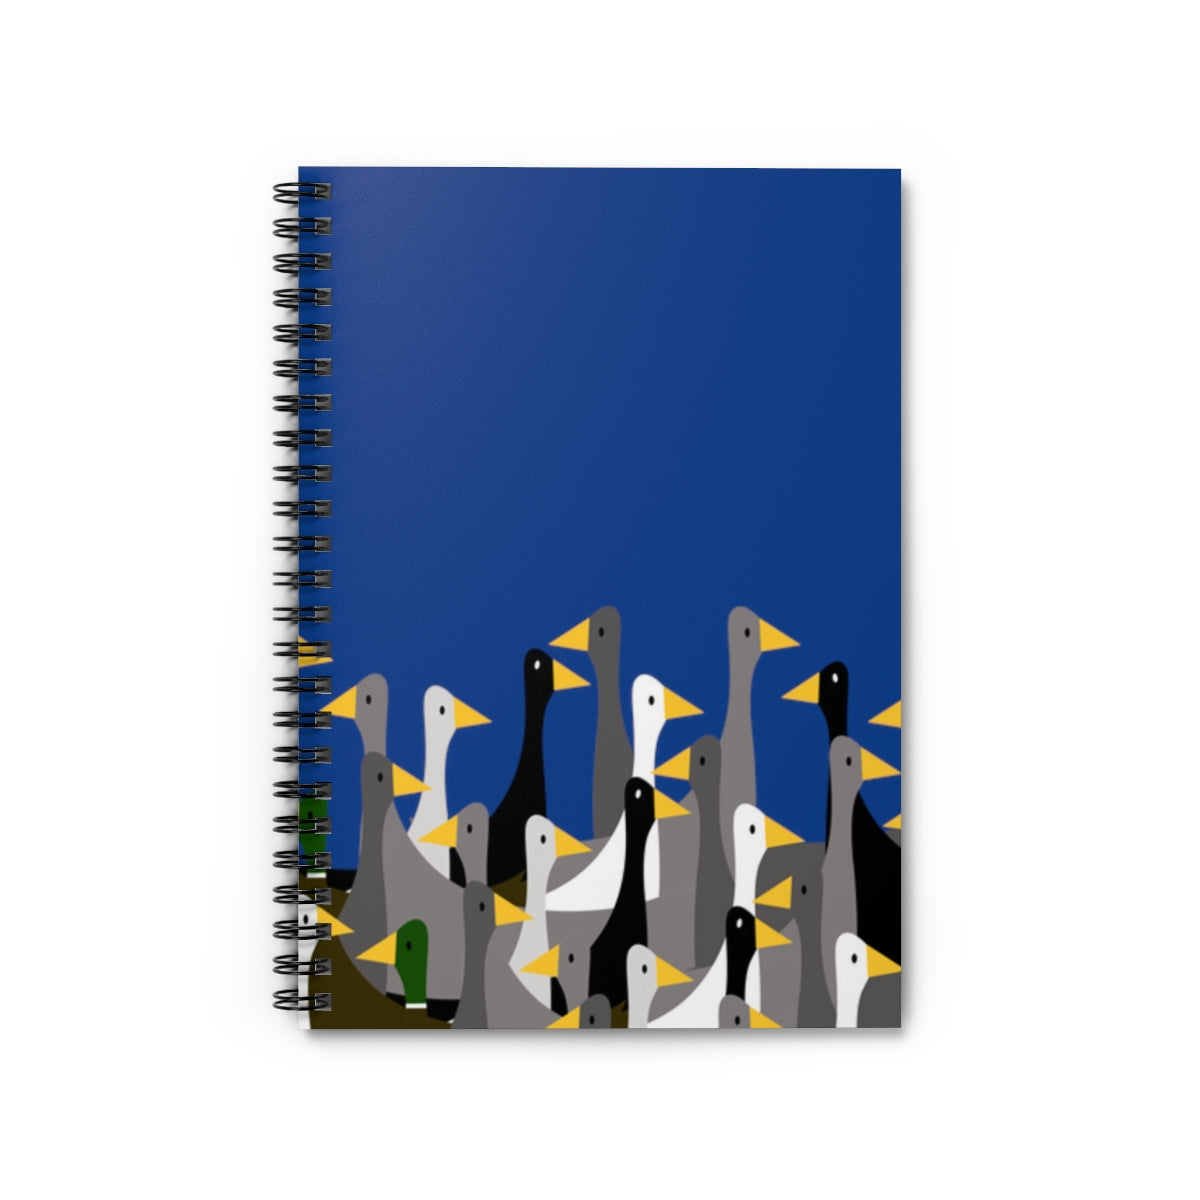 Not as many ducks - blue - Spiral Notebook - Ruled Line